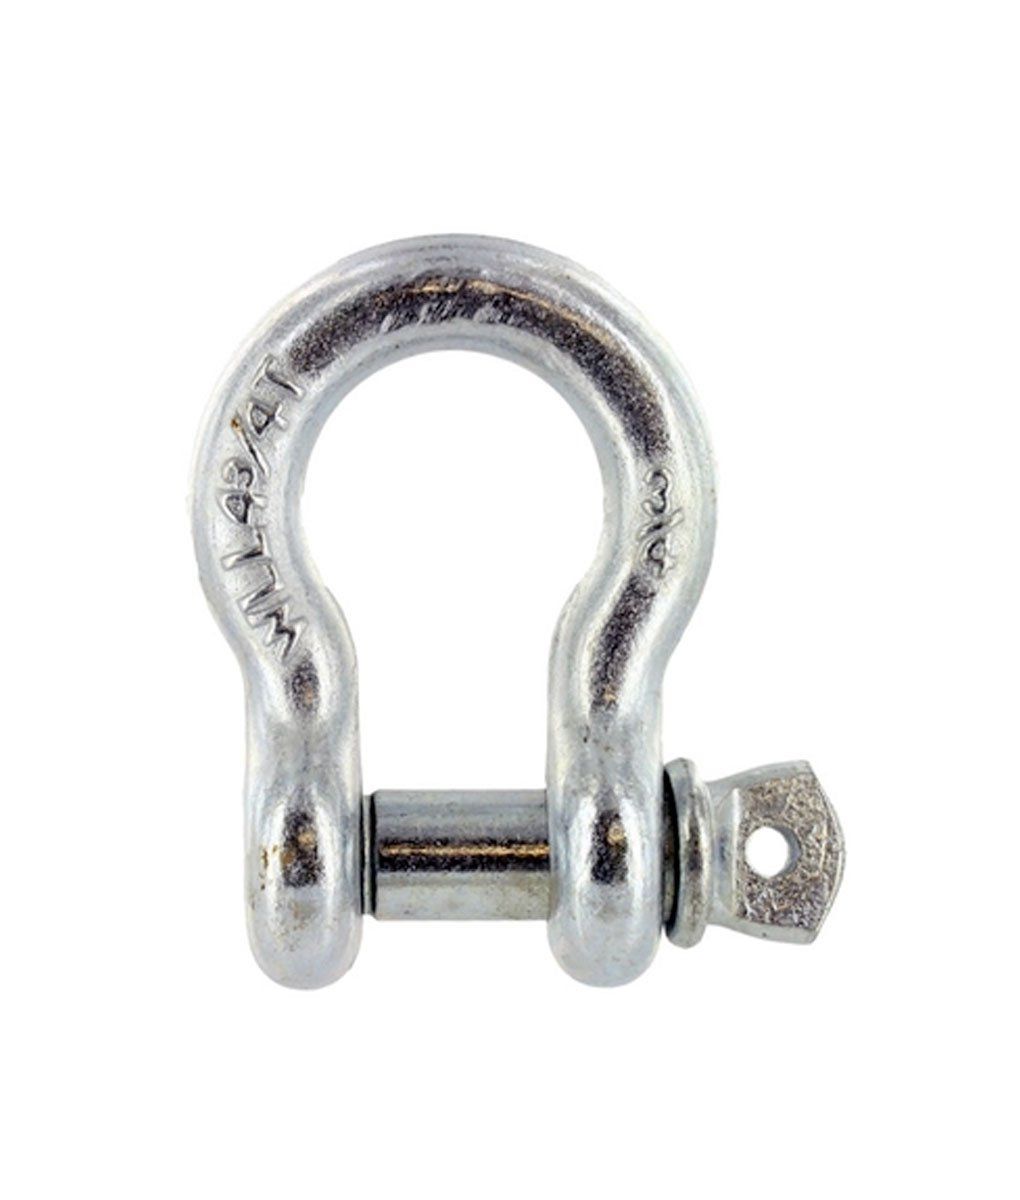 All-Pro Off-Road 3/4 in Steel D-Ring Shackle - Click Image to Close